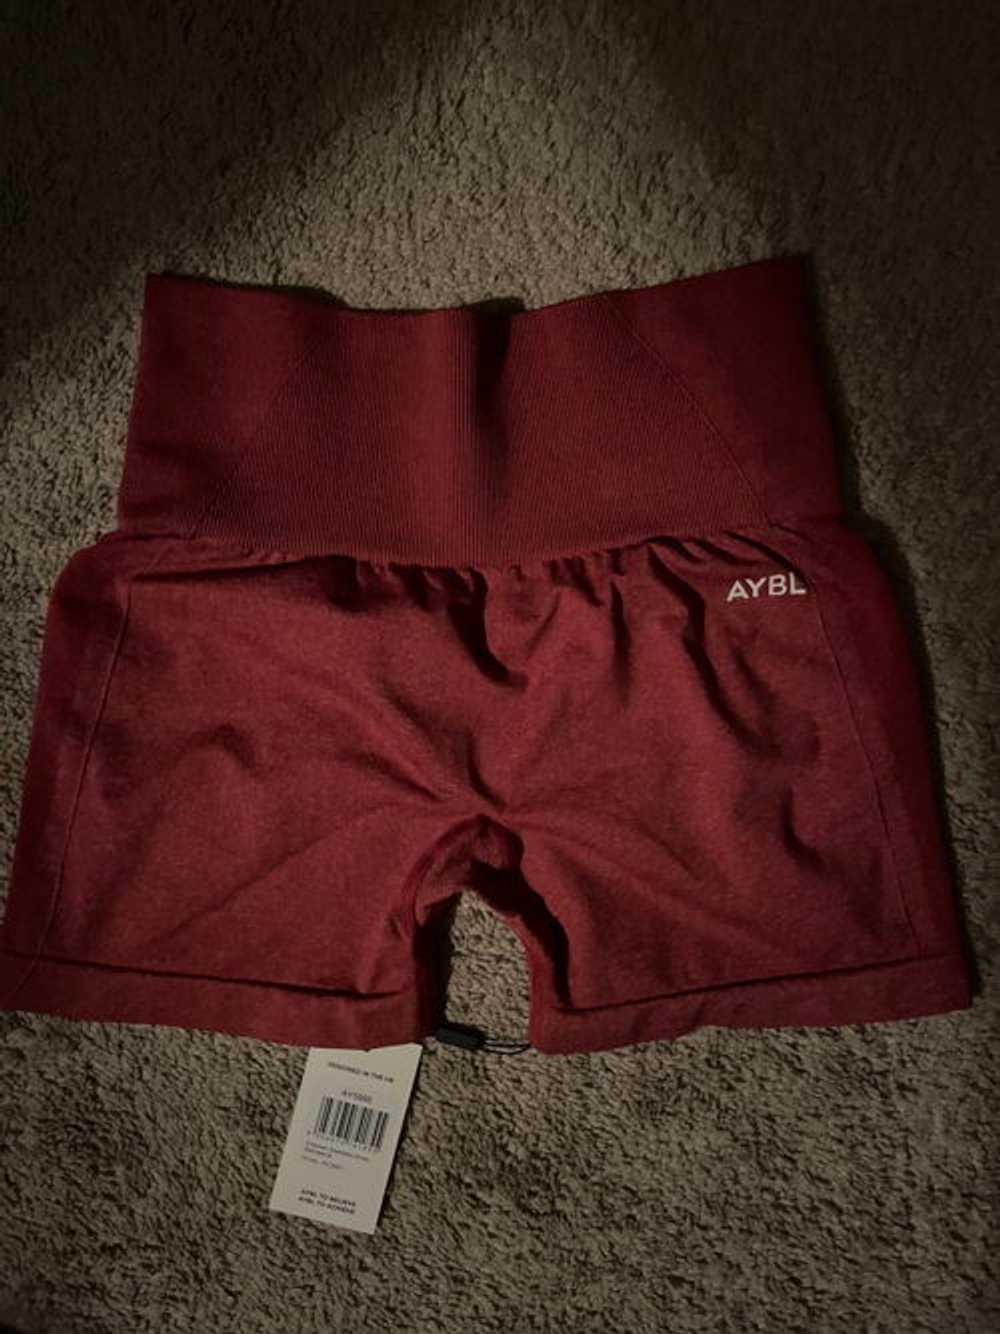 AYBL Empower Seamless Shorts - Red Marl - image 5